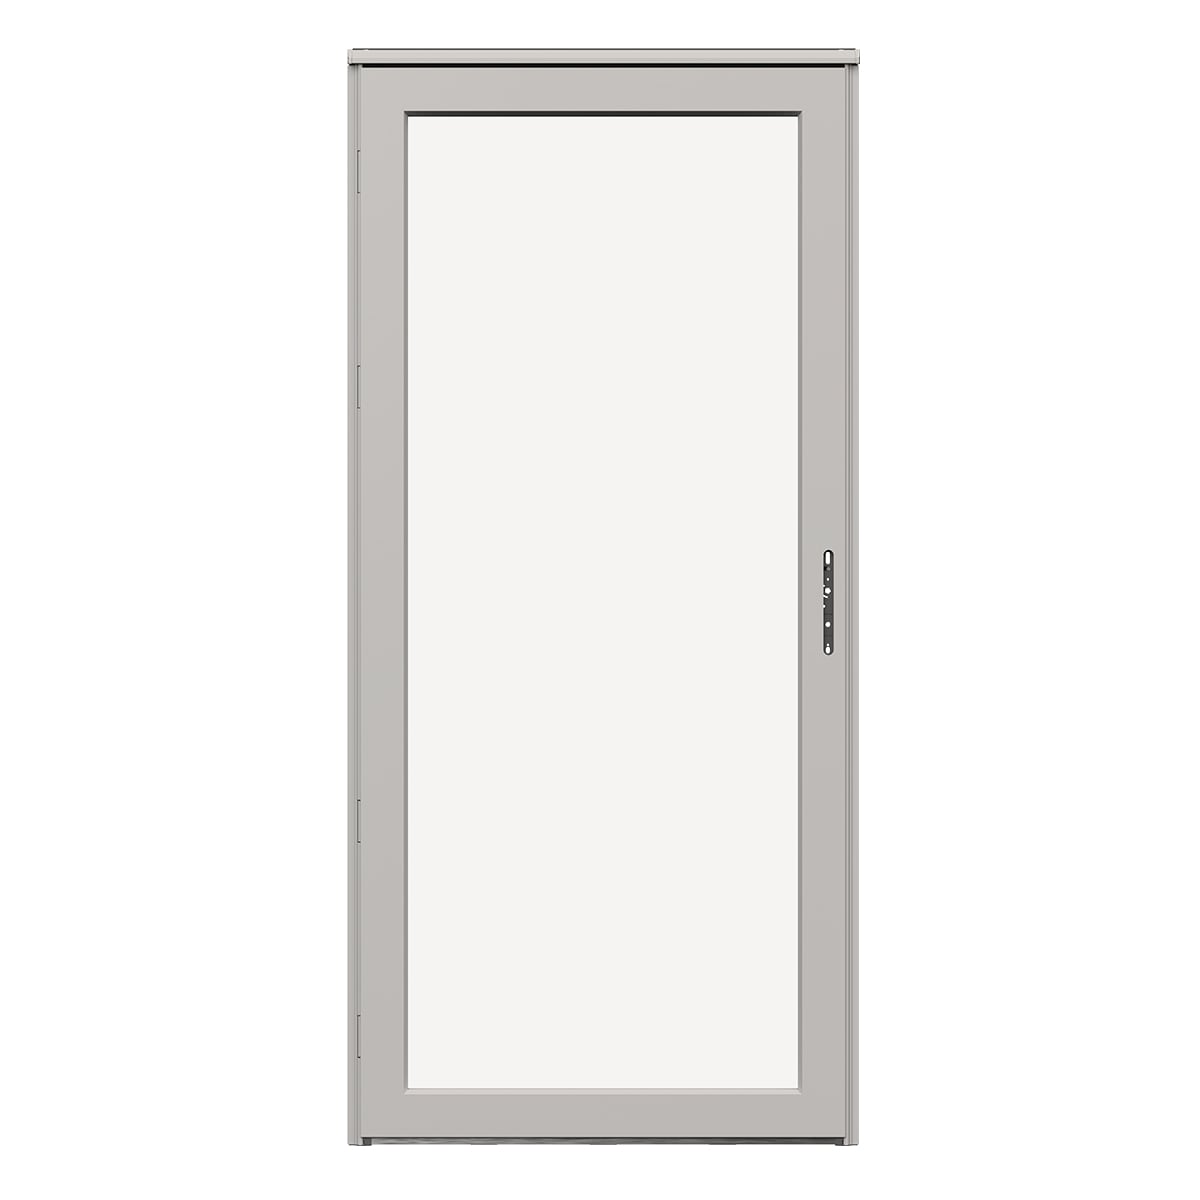 Platinum Secure Glass 36-in x 81-in Pebblestone Full-view Aluminum Storm Door Right-Hand Outswing in Brown | - LARSON 44904372L